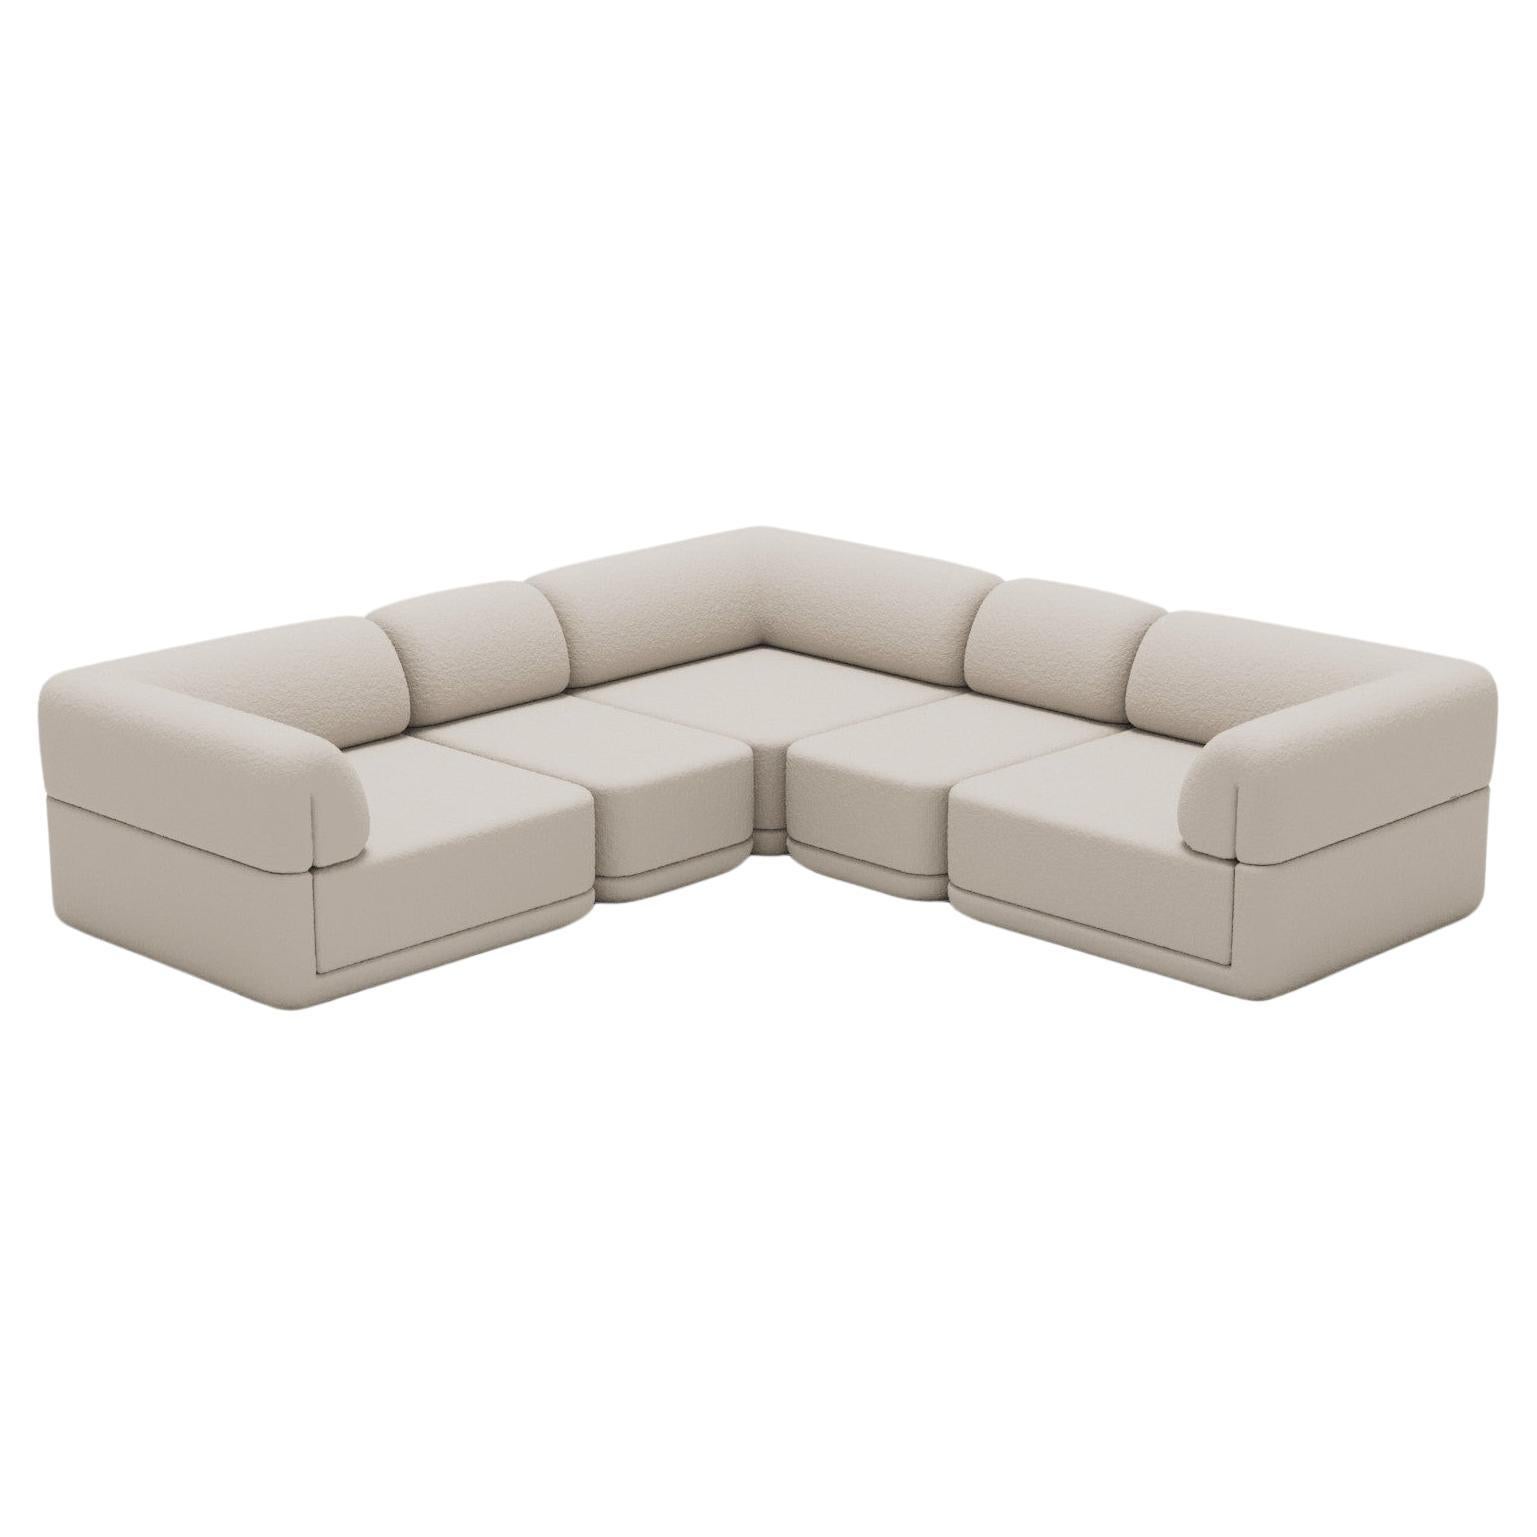 Corners & Slims - Inspired by 70s Italian Luxury Furniture

Discover The Cube Sofa, where art meets adaptability. Its sculptural design and customizable comfort create endless possibilities for your living space. Make a statement, elevate your